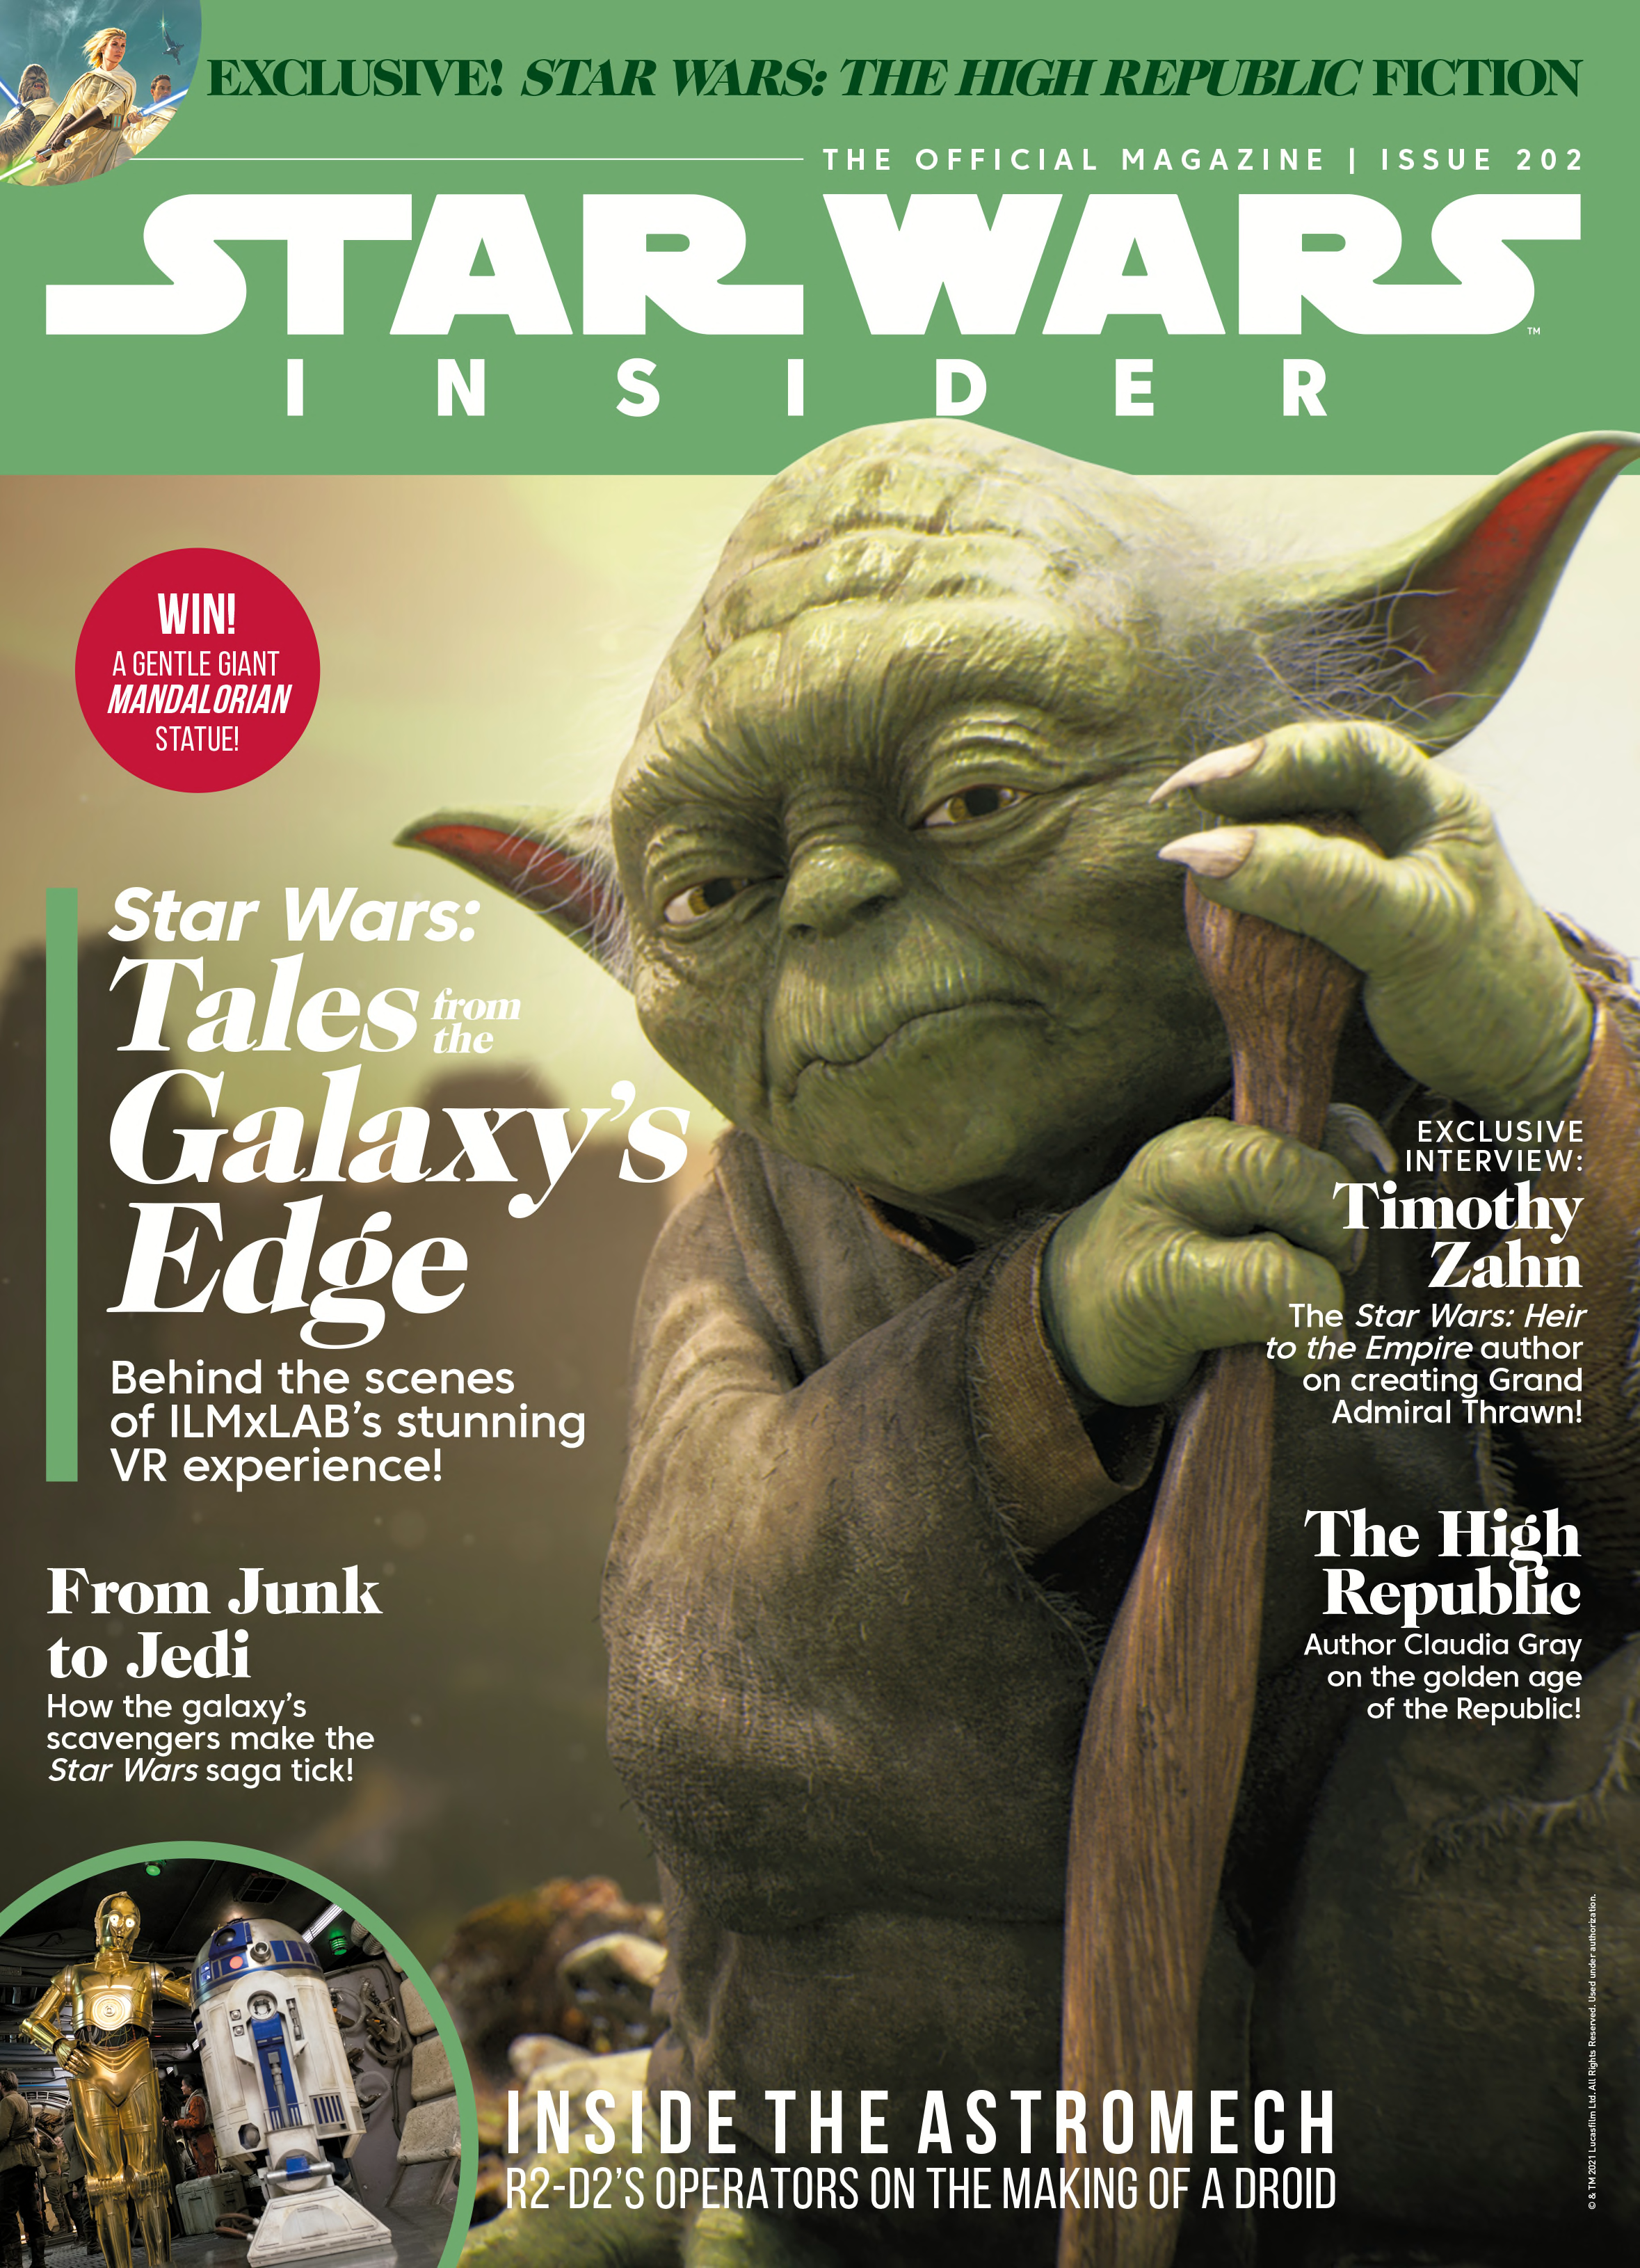 Star Wars Insider #202 preview: R2-D2's top five tools (exclusive)